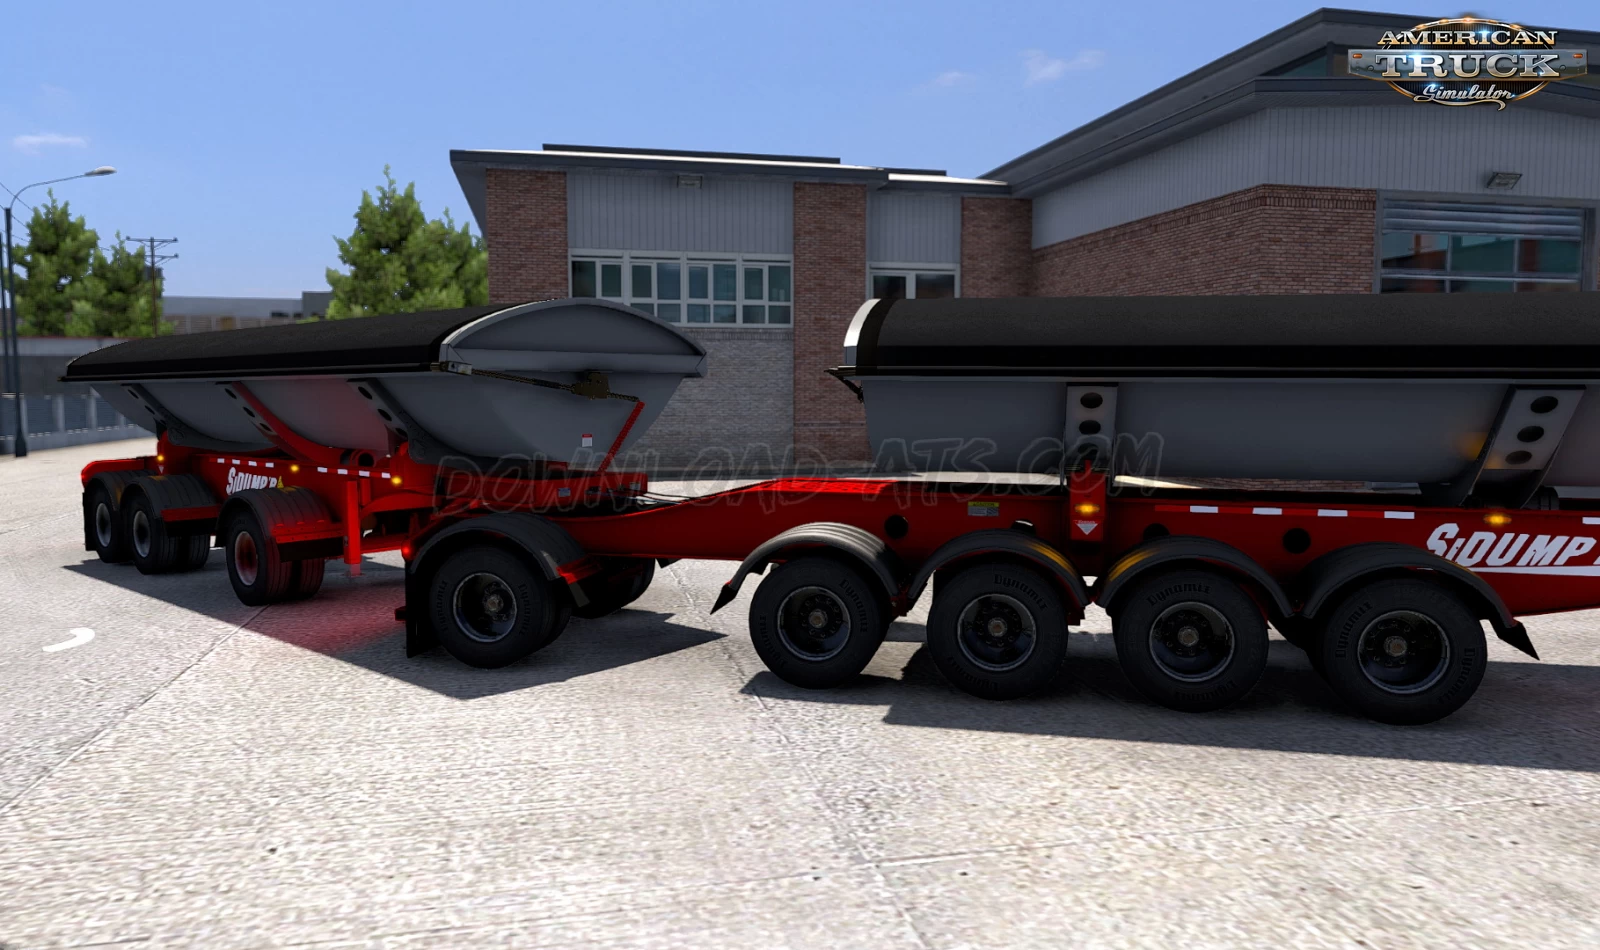 SiDump'r Trailer Ownable v1.0 (1.39.x) for ATS